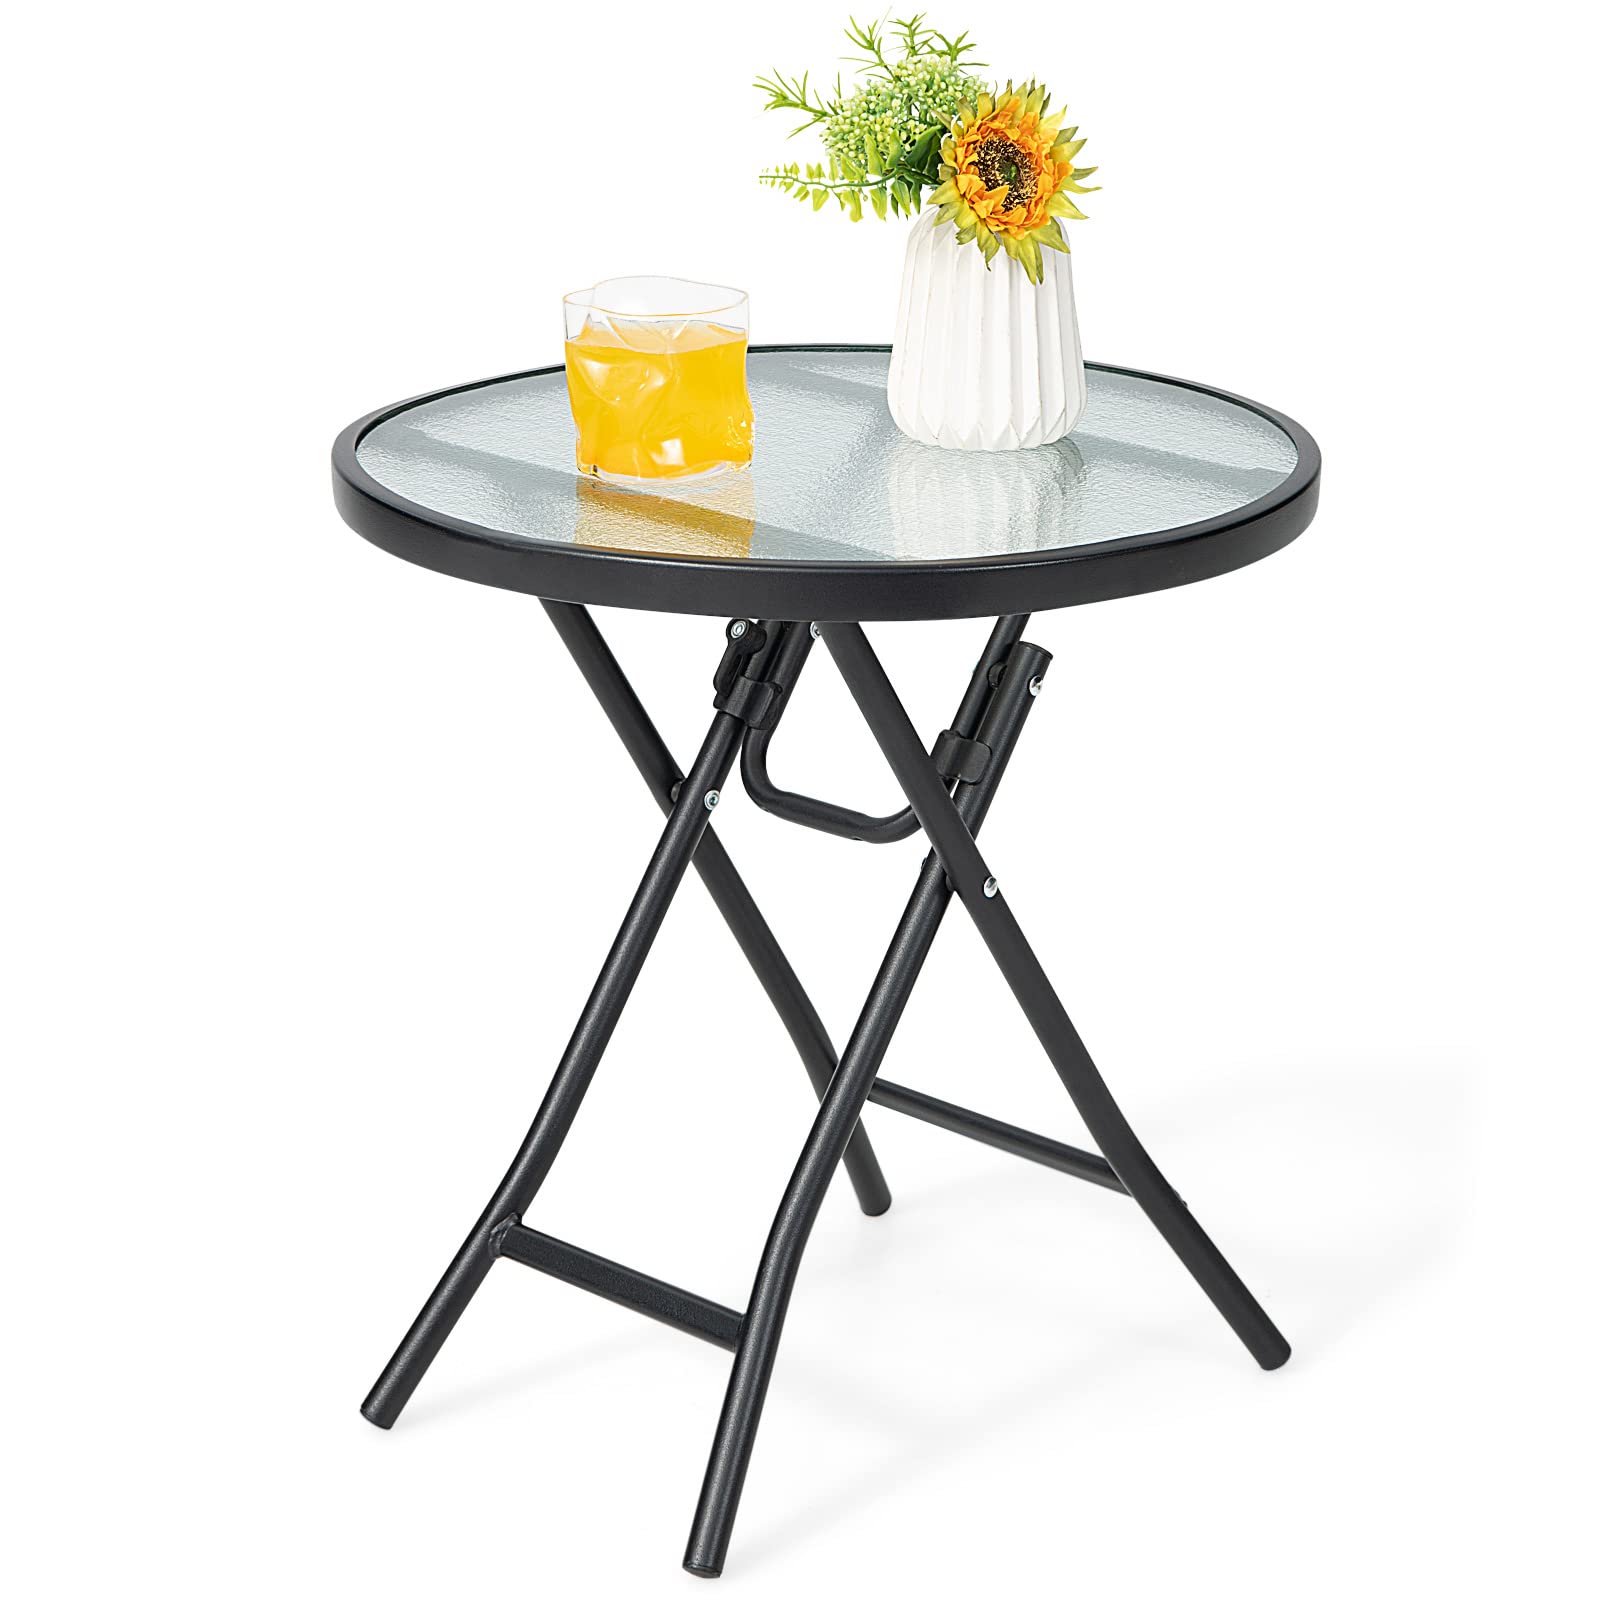 Giantex Folding Side Table, Square Small Patio Table